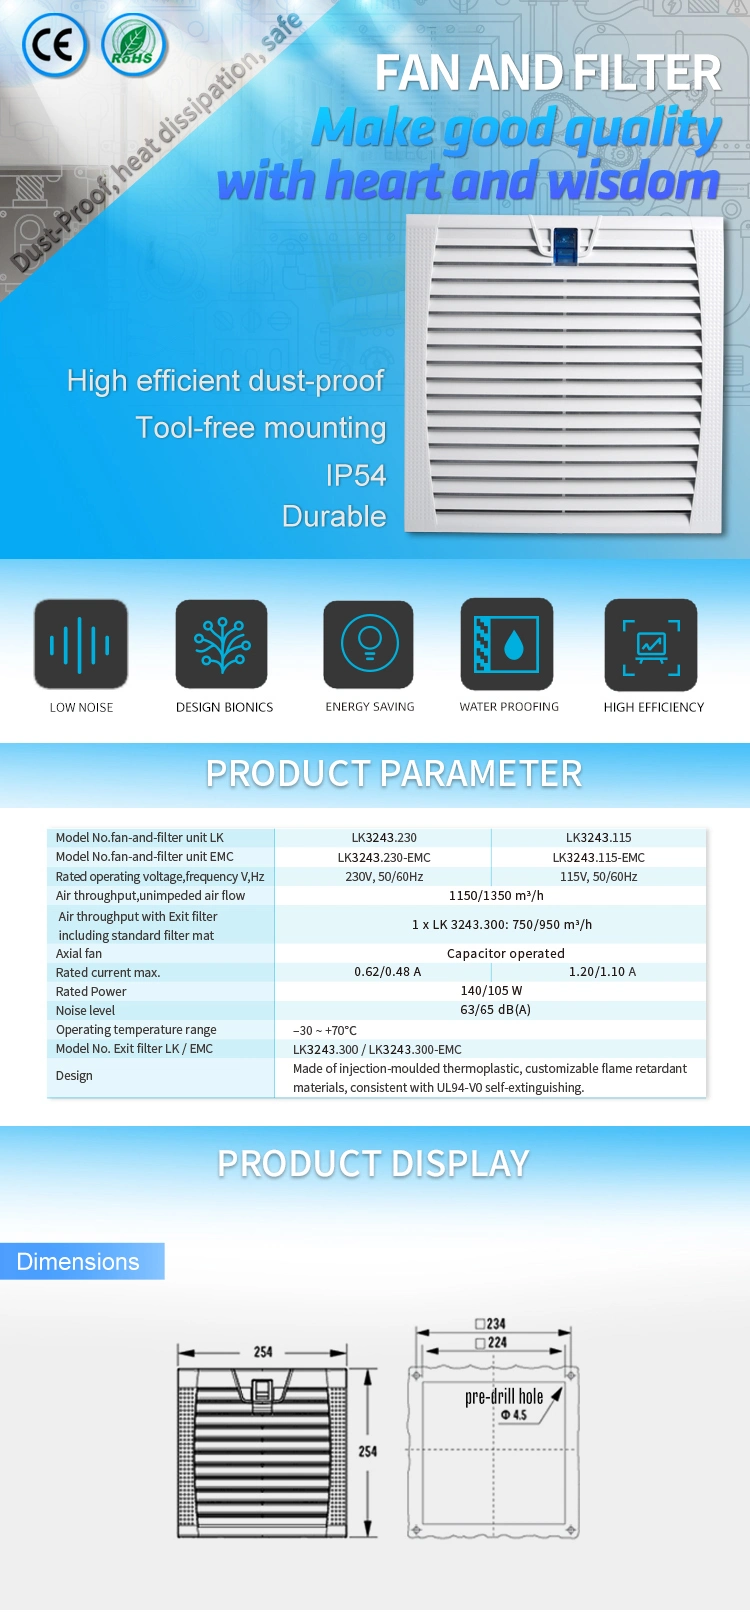 New Series Ventilation Filter with Fan EMC Motor, Energy-Saving, High-Equality Lk3243